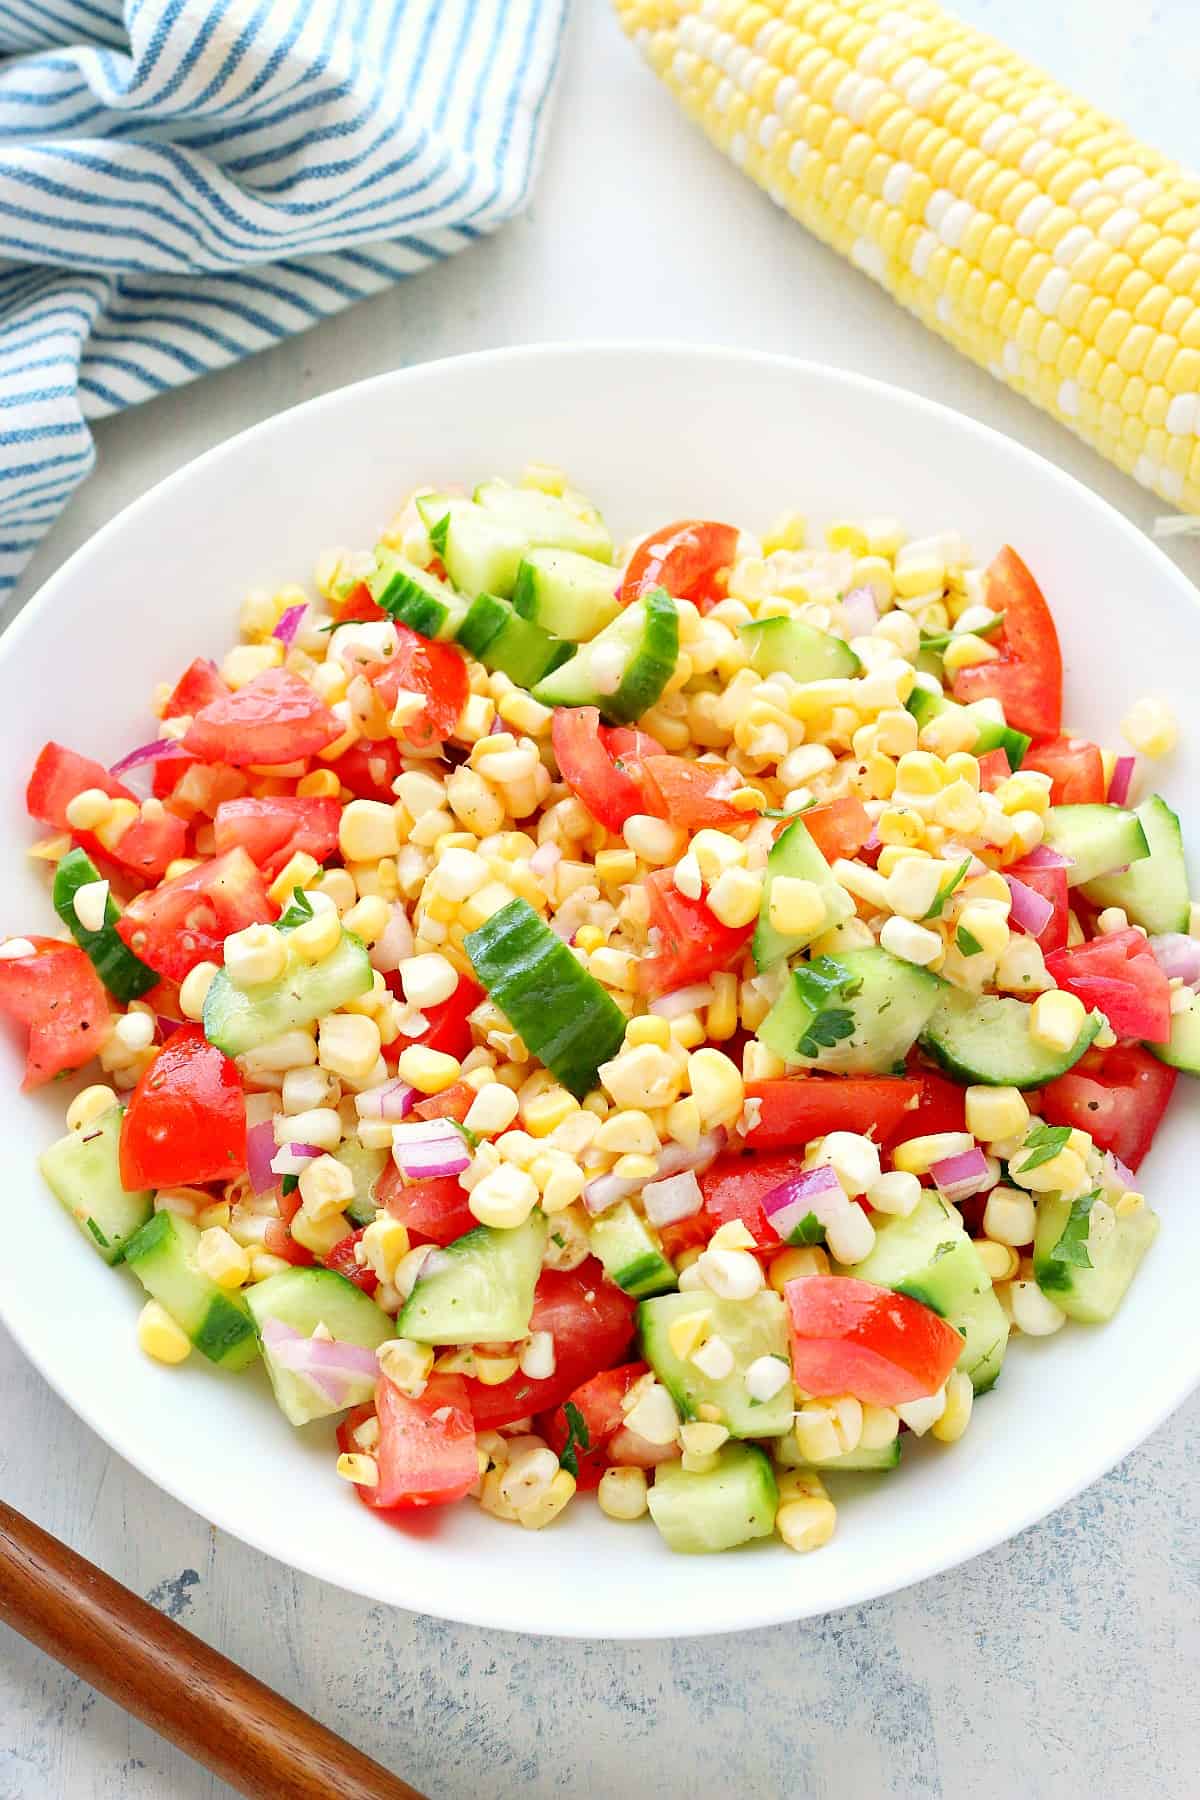 Corn salad in a white serving bowl.